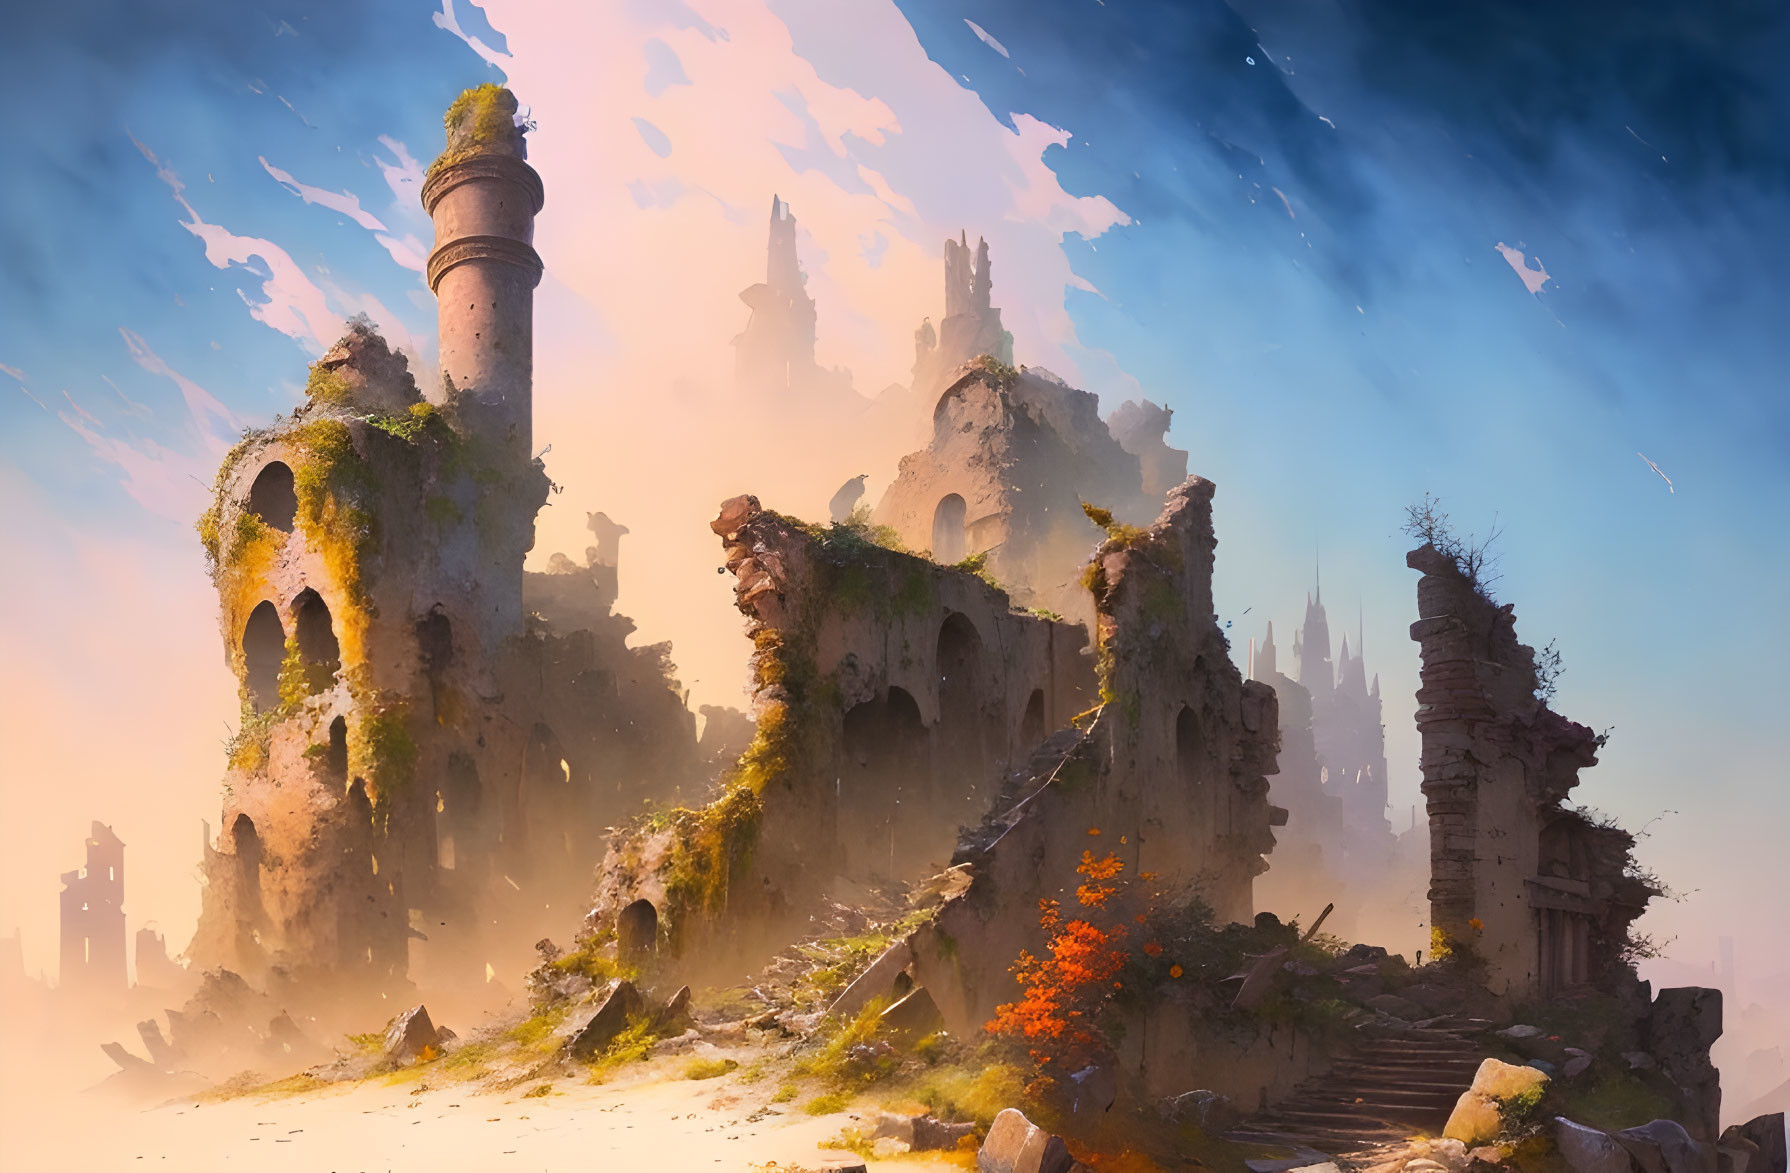 Sunlit ancient ruin with crumbling towers and overgrown vegetation under a vast blue sky.